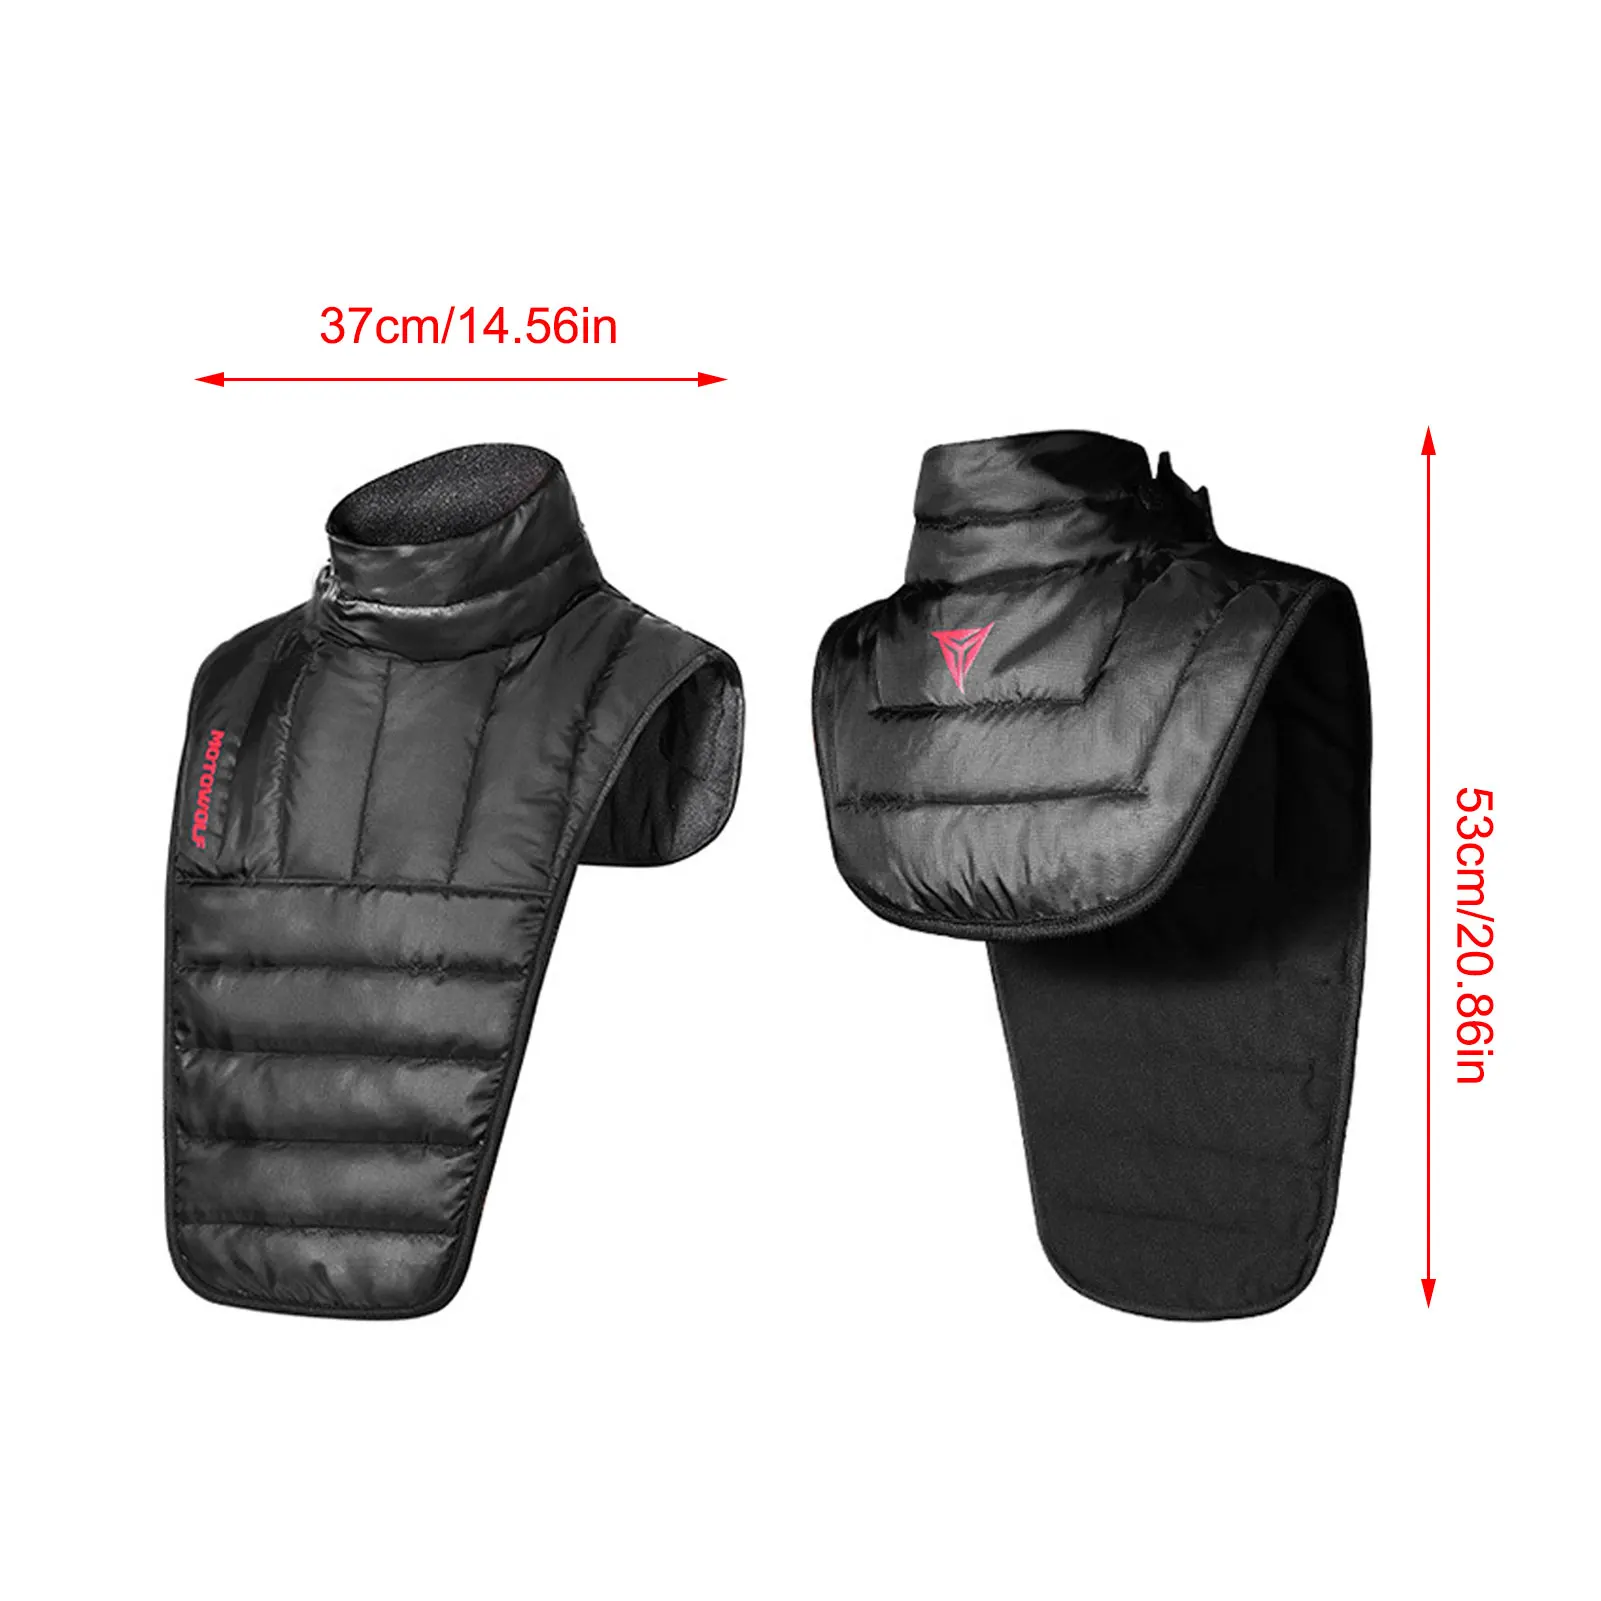 

2021 Winter Waterproof Warm Scarf Thickening Windproof Neck Warmer Riding Protection Cervical Locomotive Motorcycle Collar